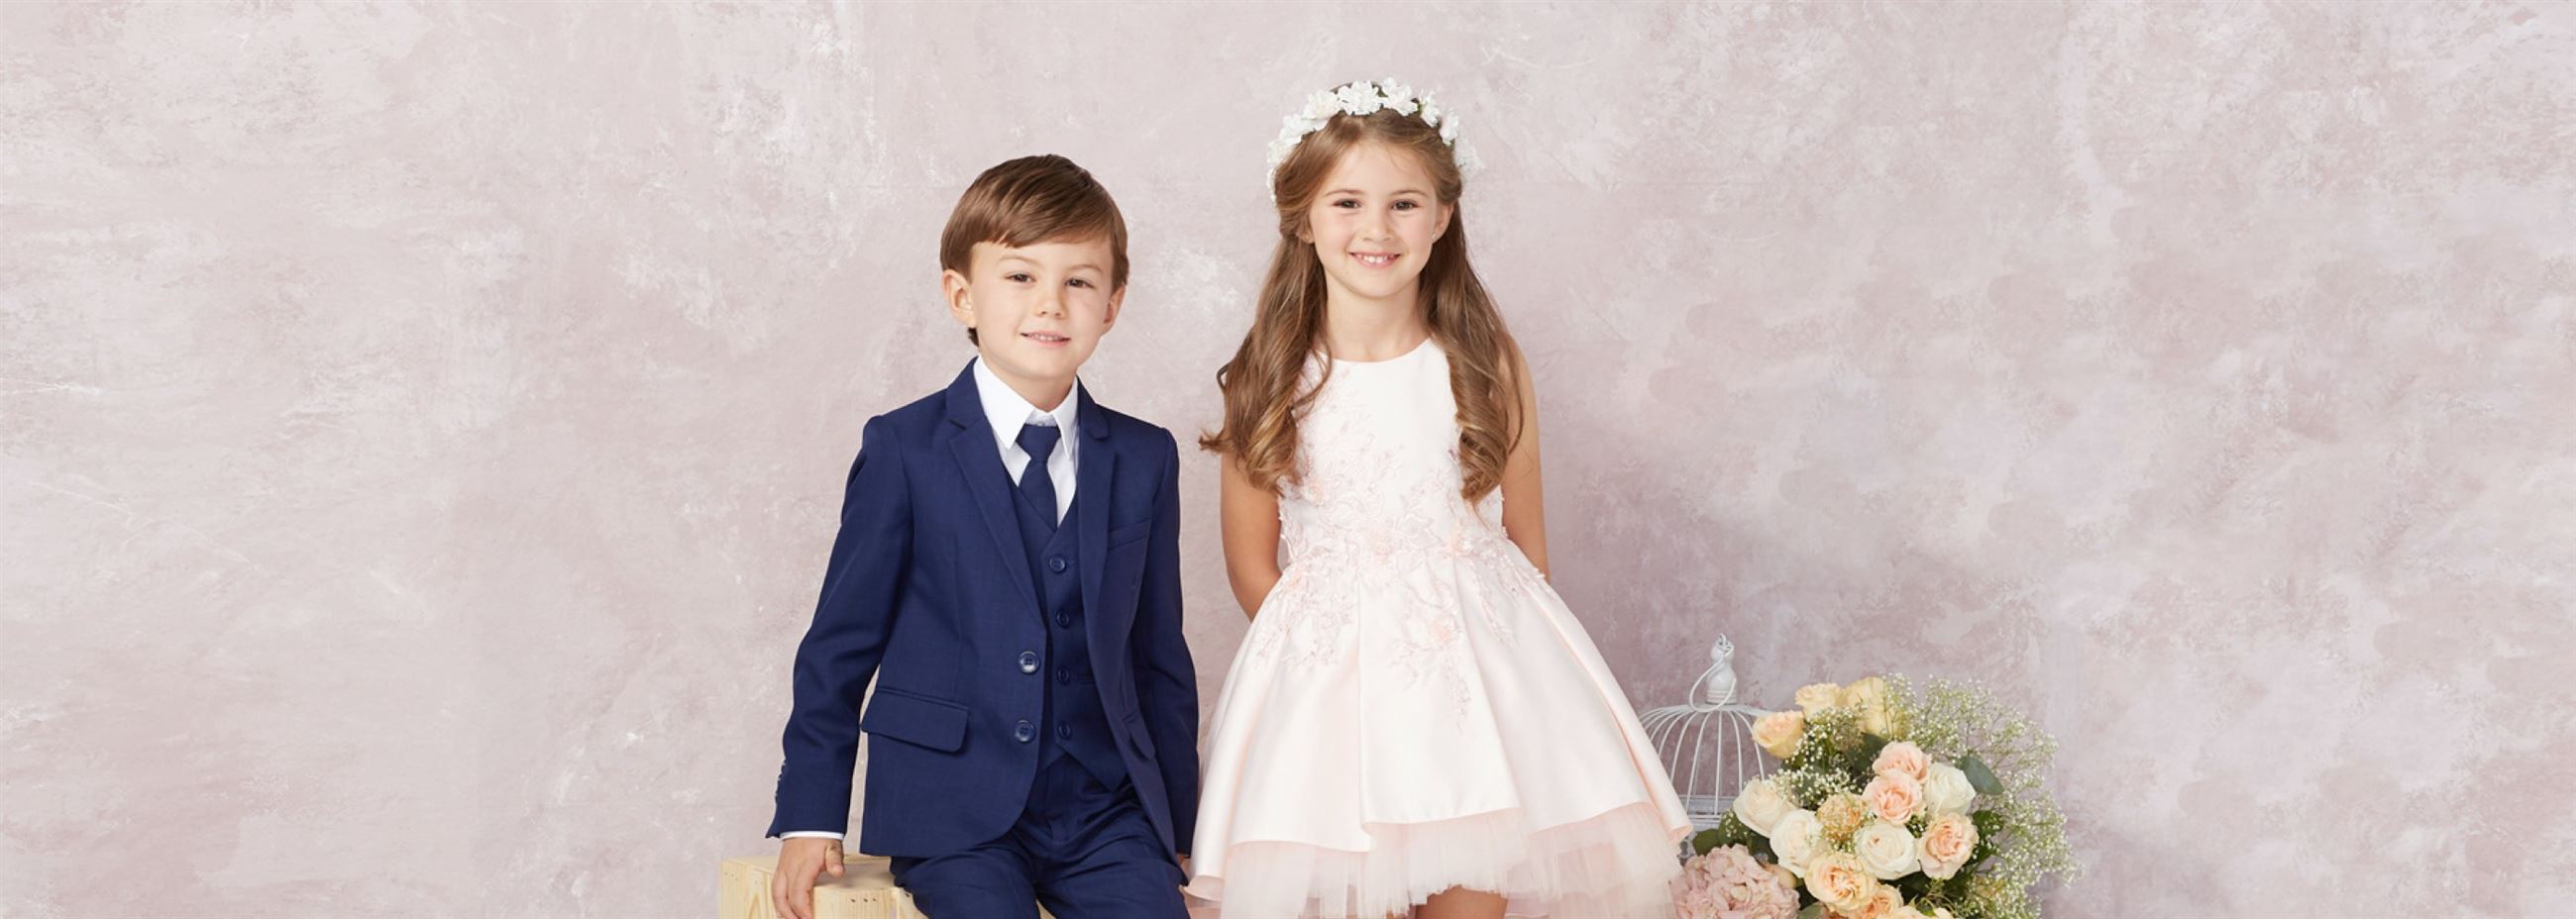 Kids & formal wear at It's Your Day Bridal located in LaSalle, Ontario